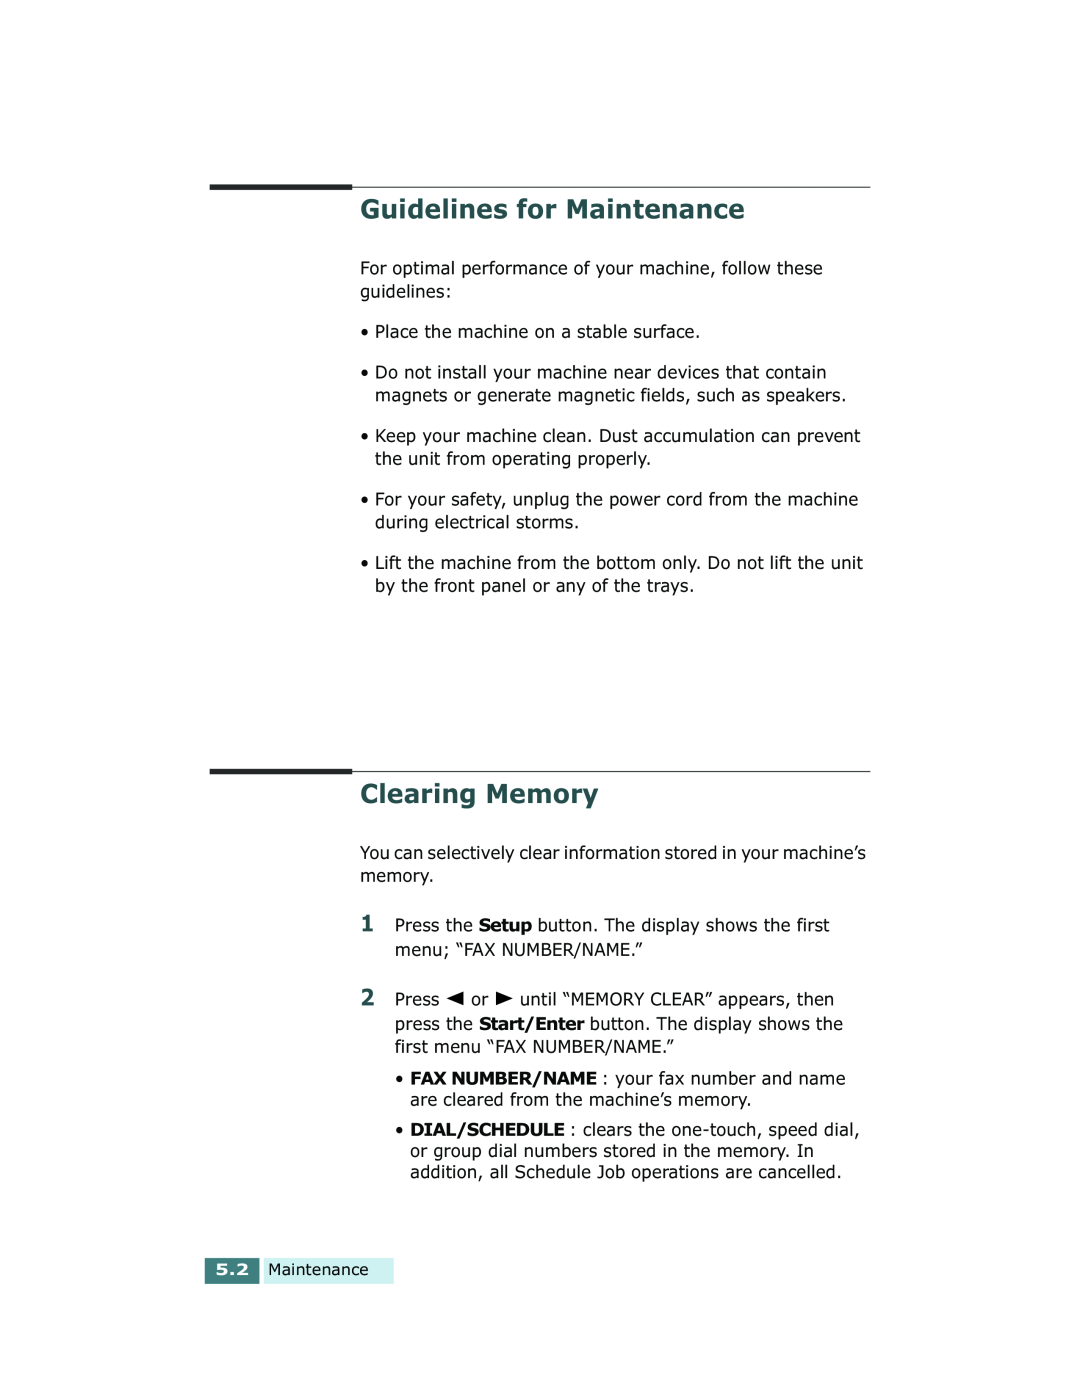 Xerox Pro 580 manual Guidelines for Maintenance, Clearing Memory 